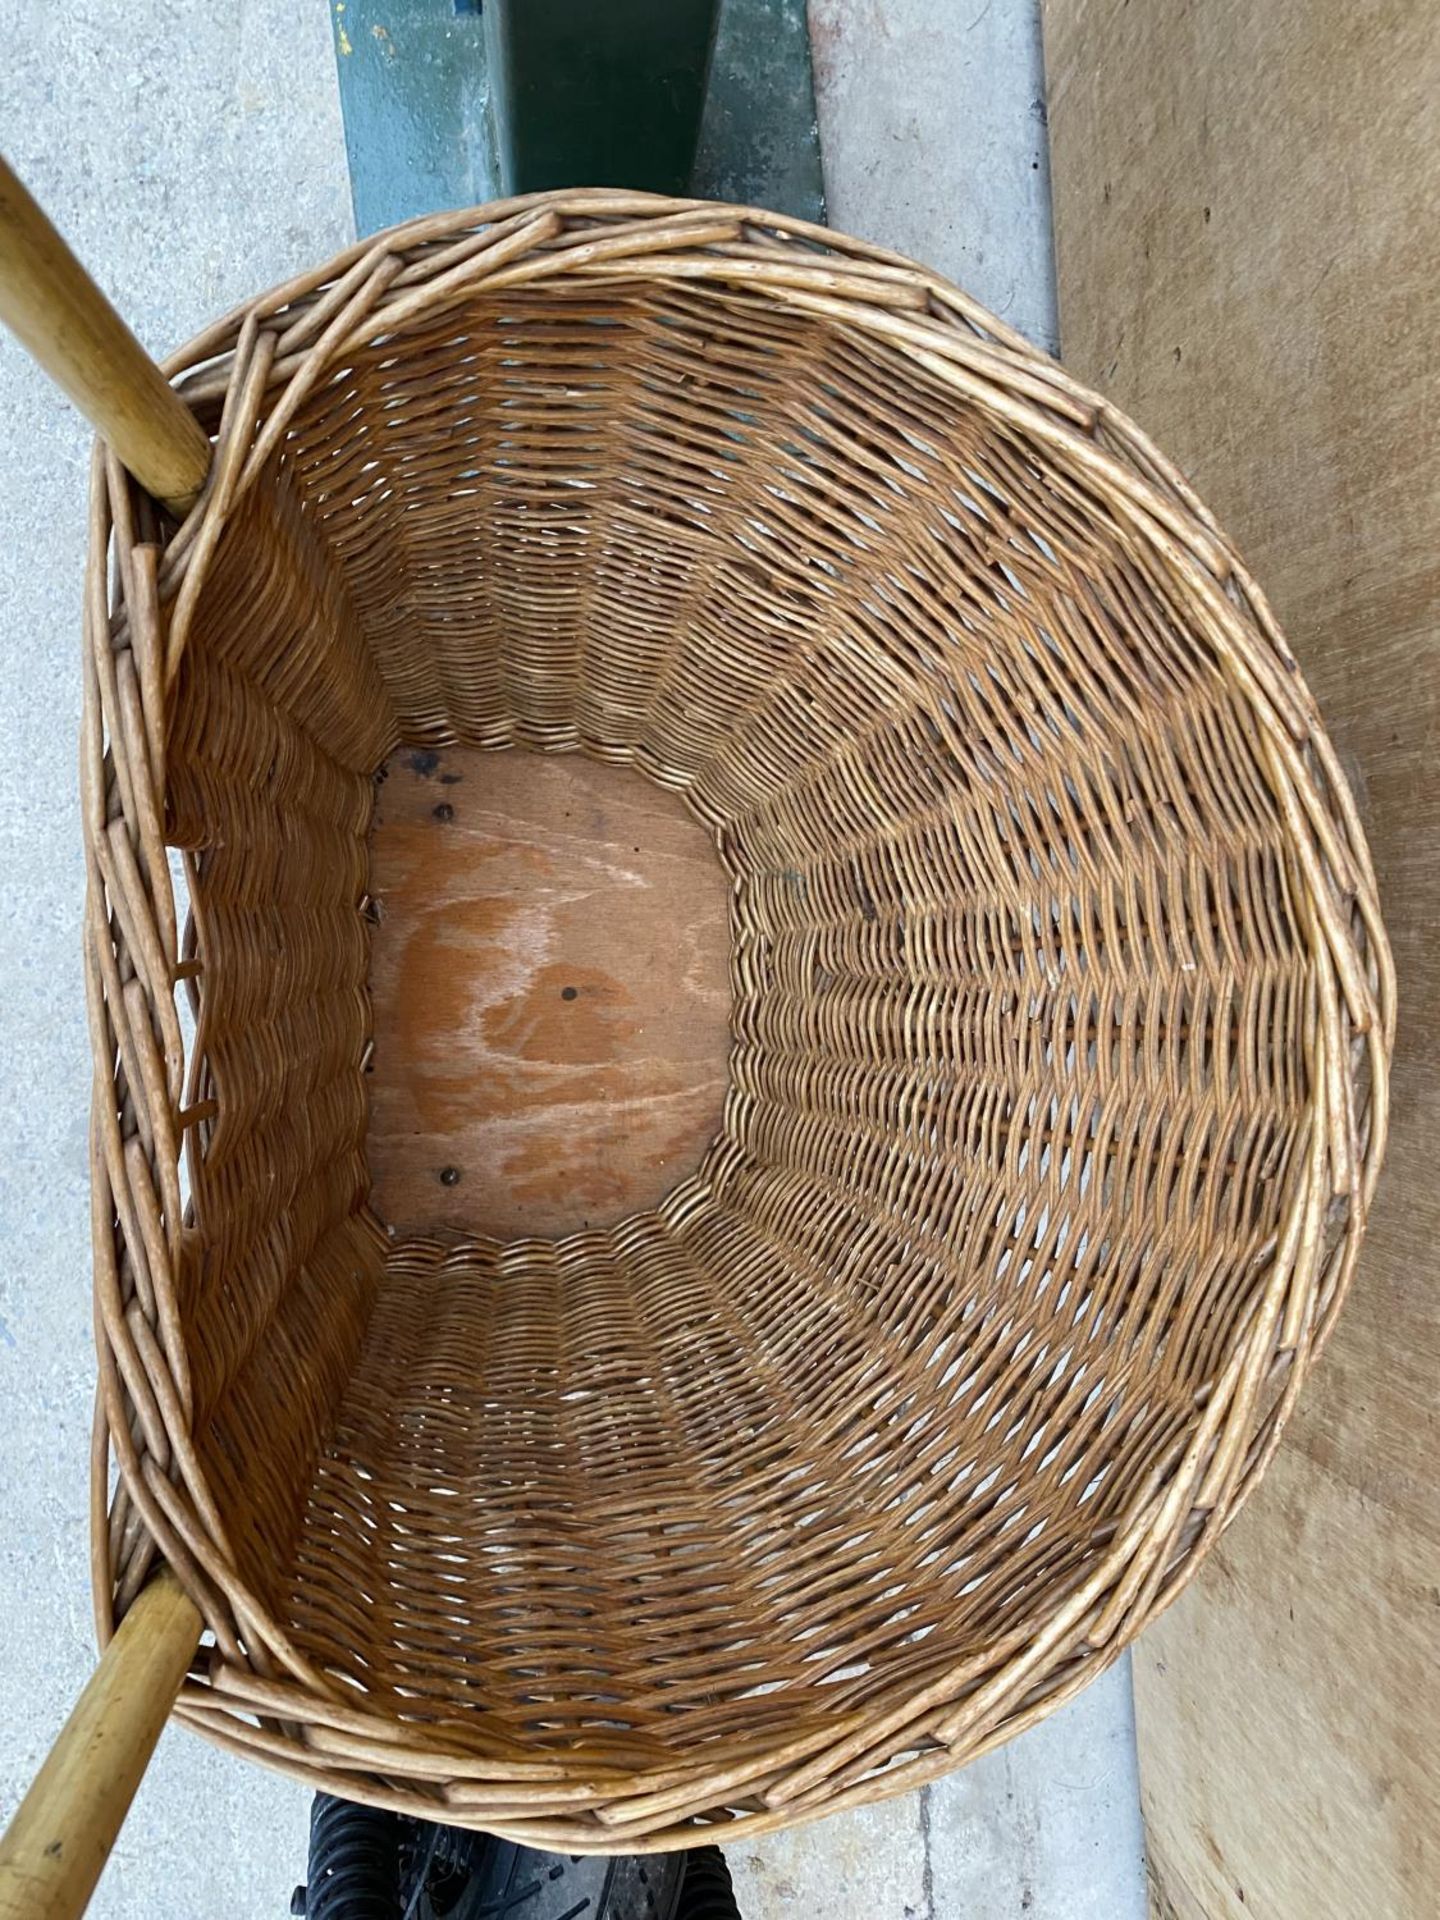 A VINTAGE 1950'S WICKER SHOPPING BASKET - Image 4 of 5